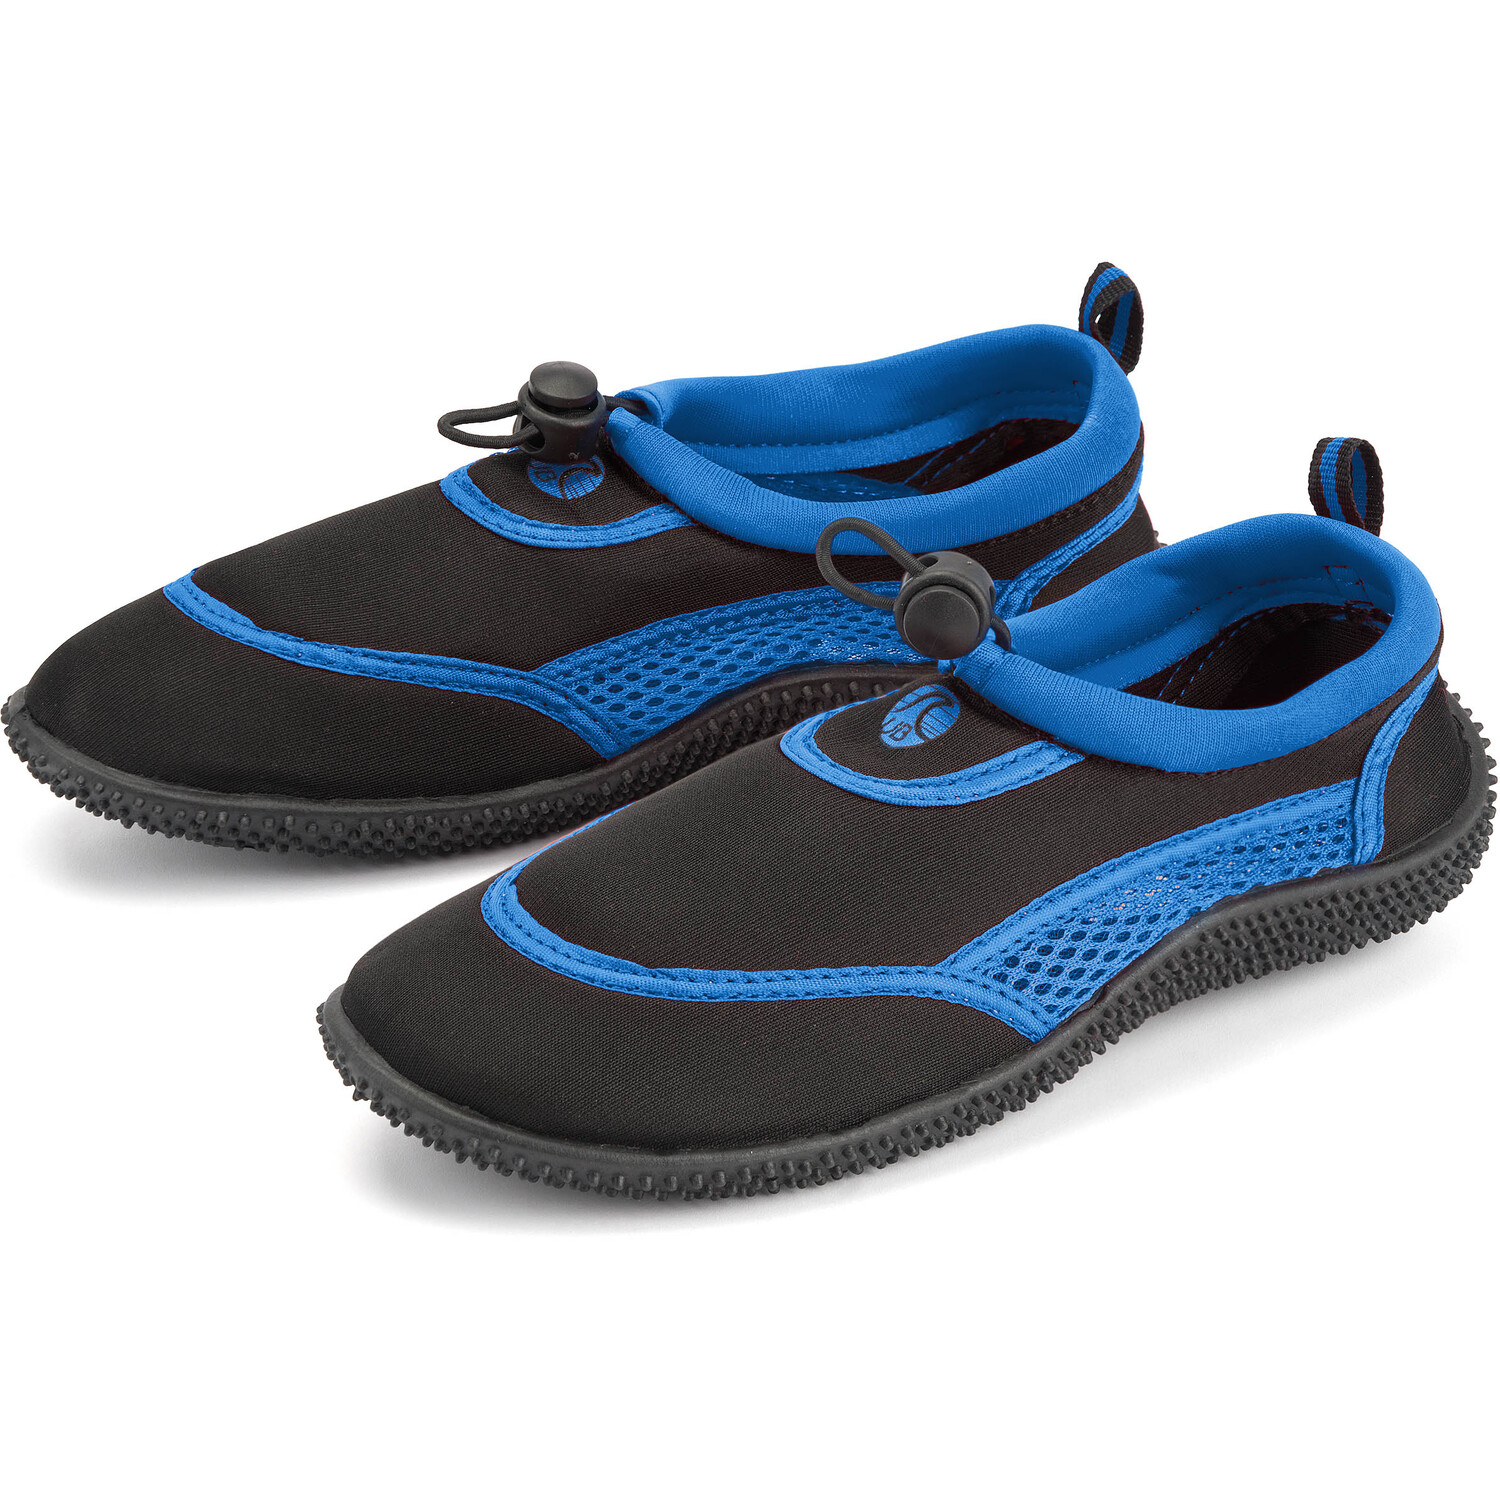 Toggle Kids Water Shoes - Blue Image 3